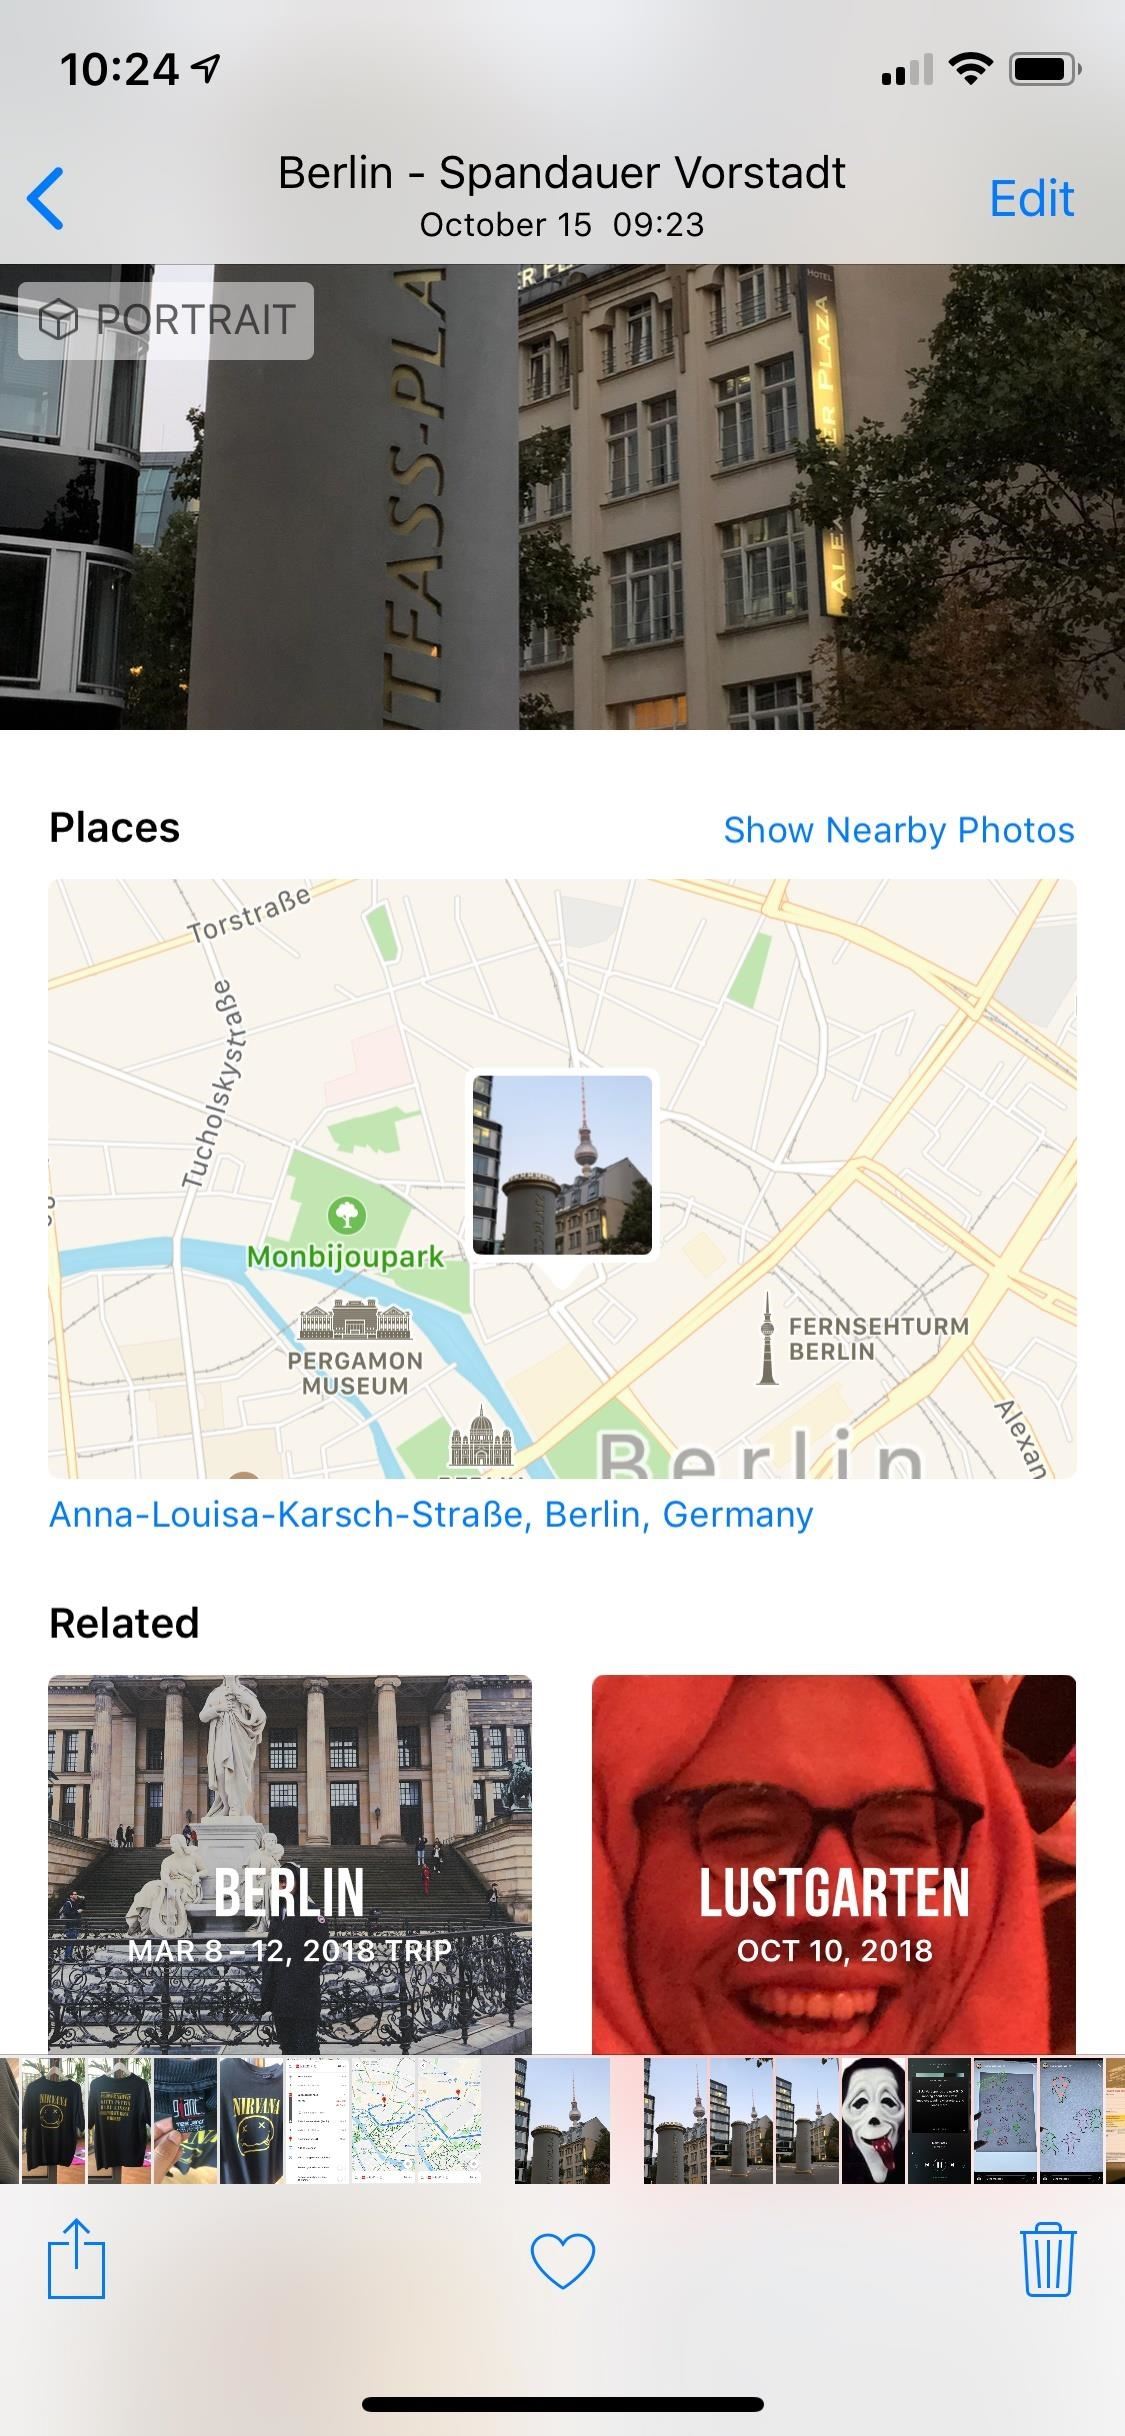 How to Stop Your iPhone Photos from Broadcasting Your Location to Others